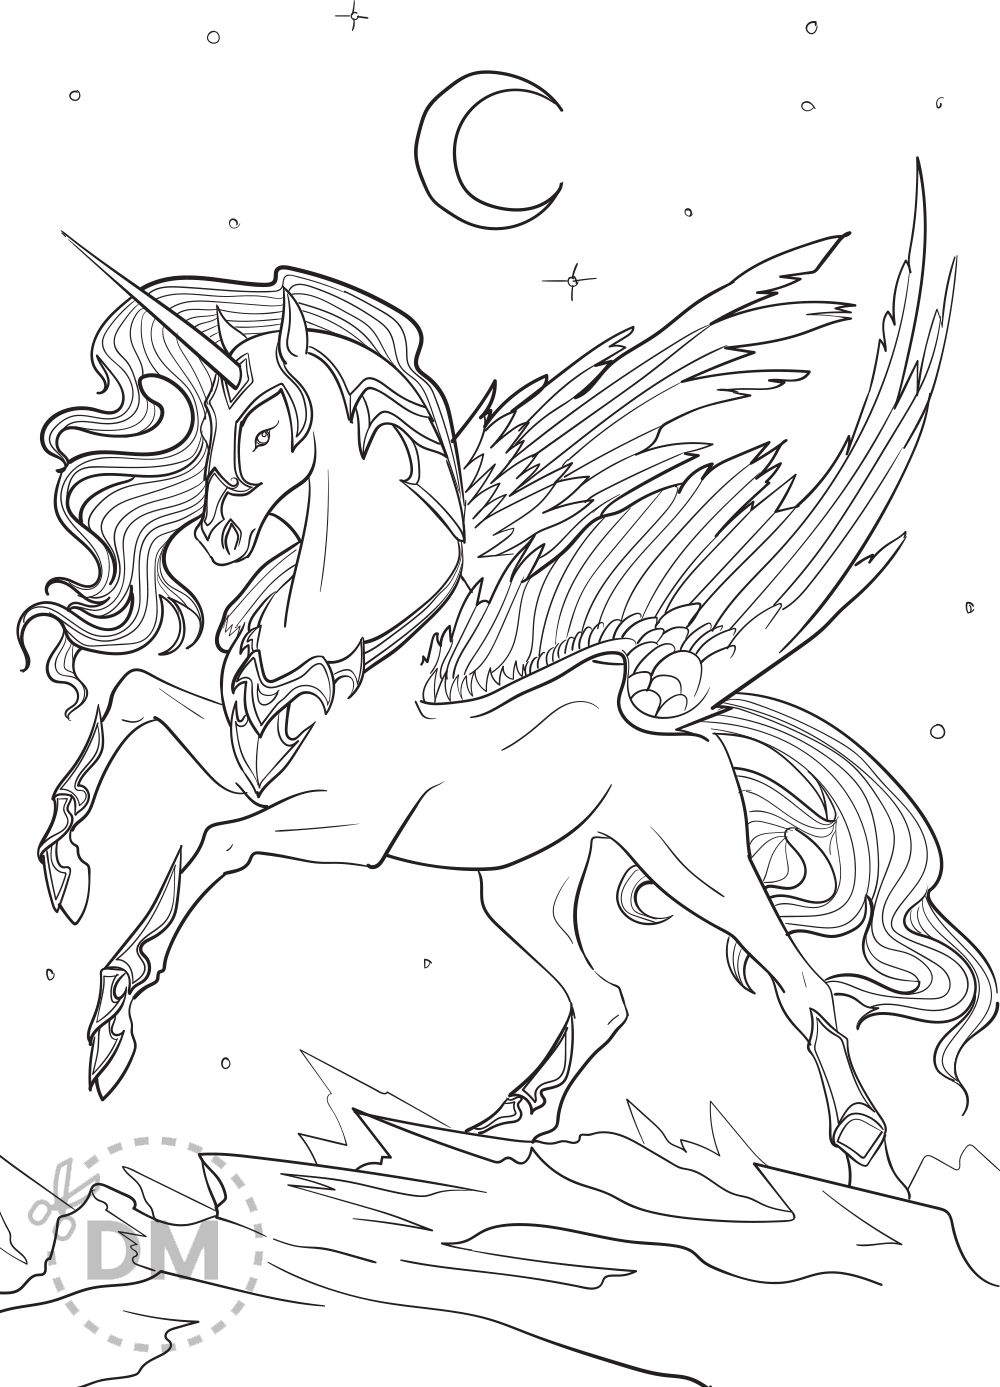 Unicorn pegasus coloring page for teens and adults unicorn coloring pages horse coloring pages coloring pages